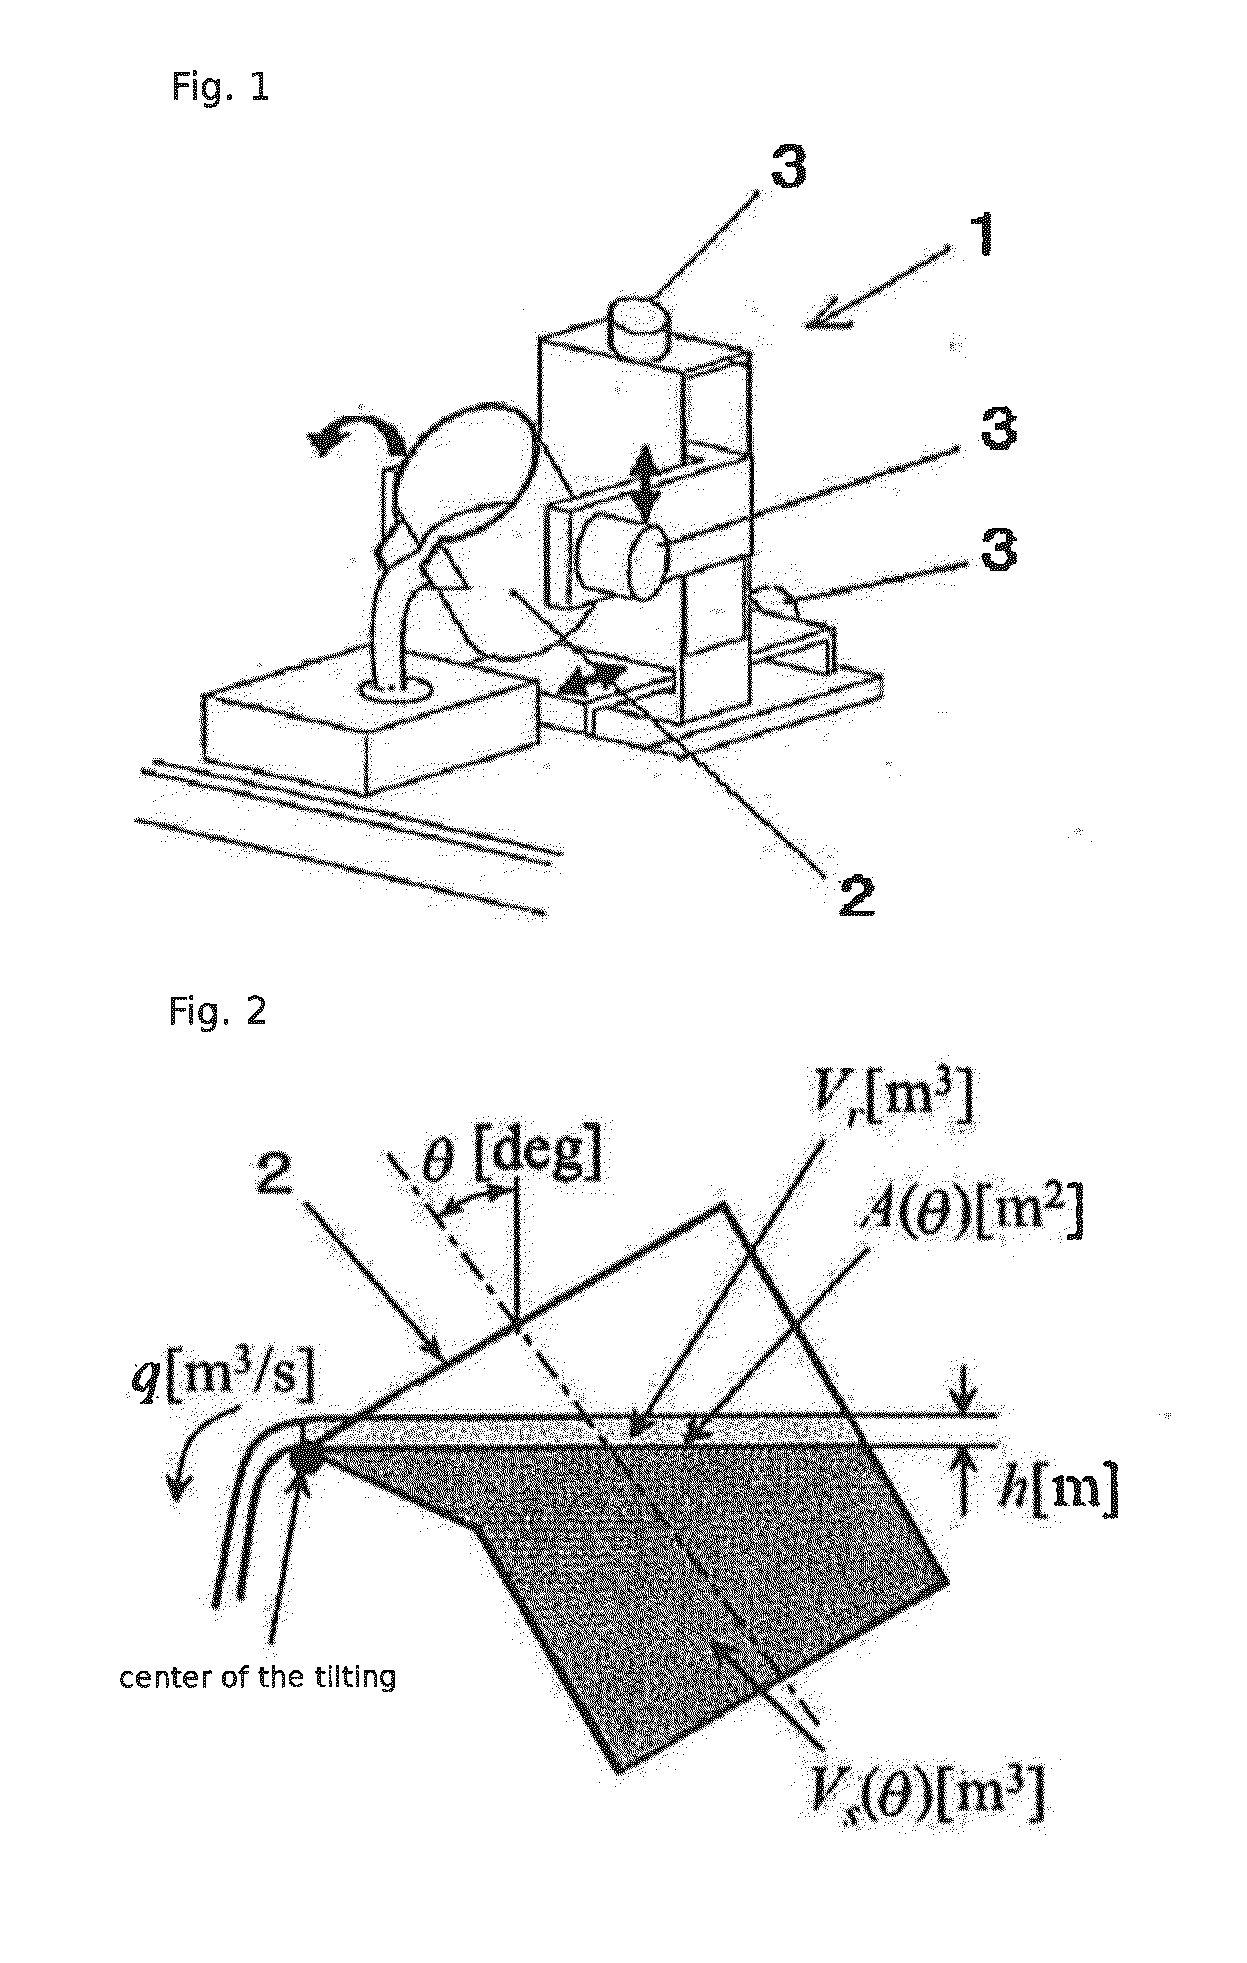 Method for automatically pouring molten metal by tilting a ladle and a medium for recording programs for controlling a tilt of a ladle